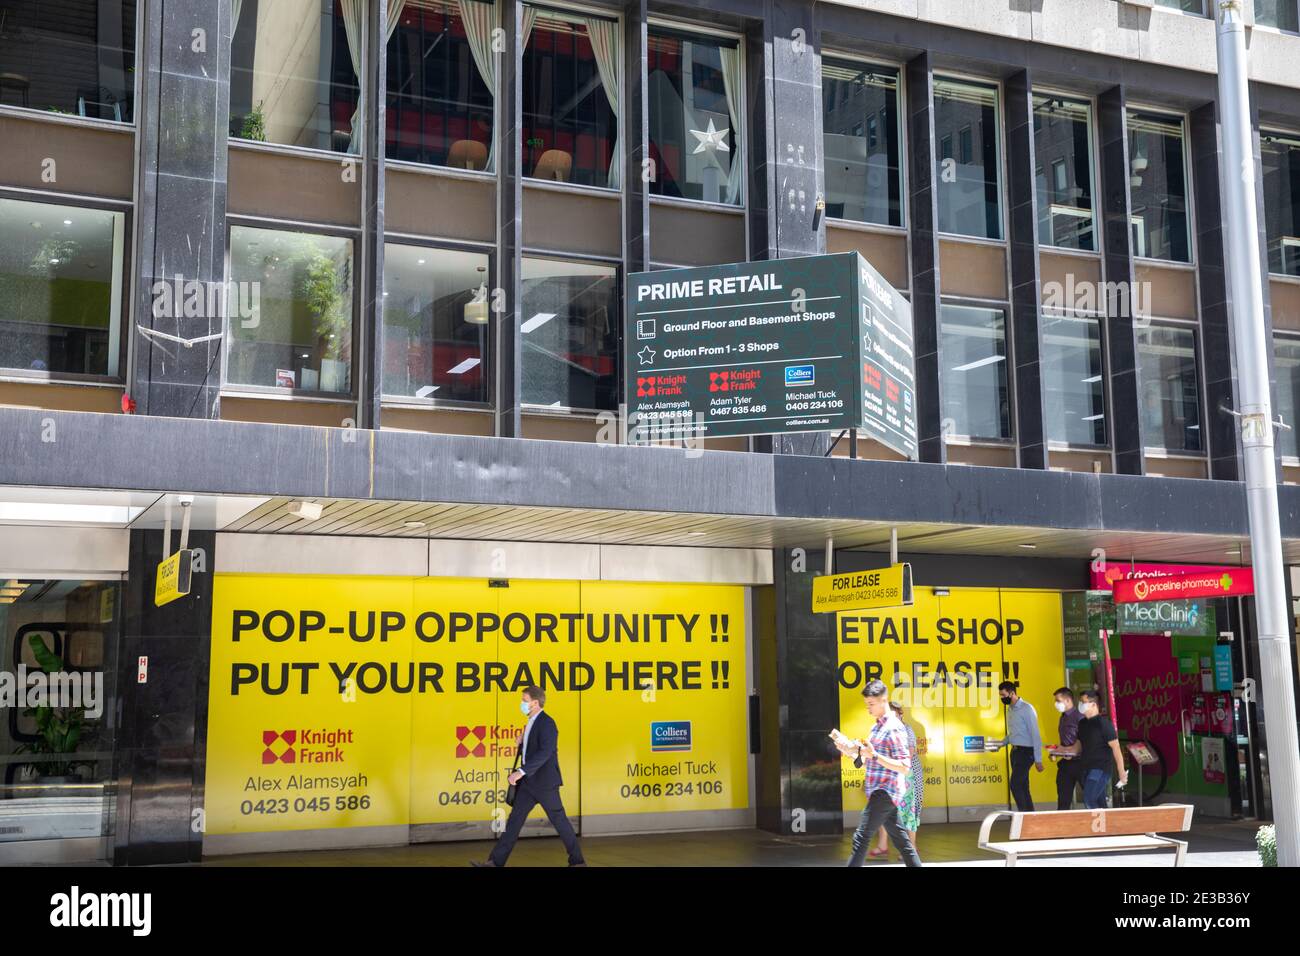 Sydney shop space to lease suitable for a pop up Shop, economic impact during covid 19 pandemic as people wear masks in the city centre,Australia Stock Photo